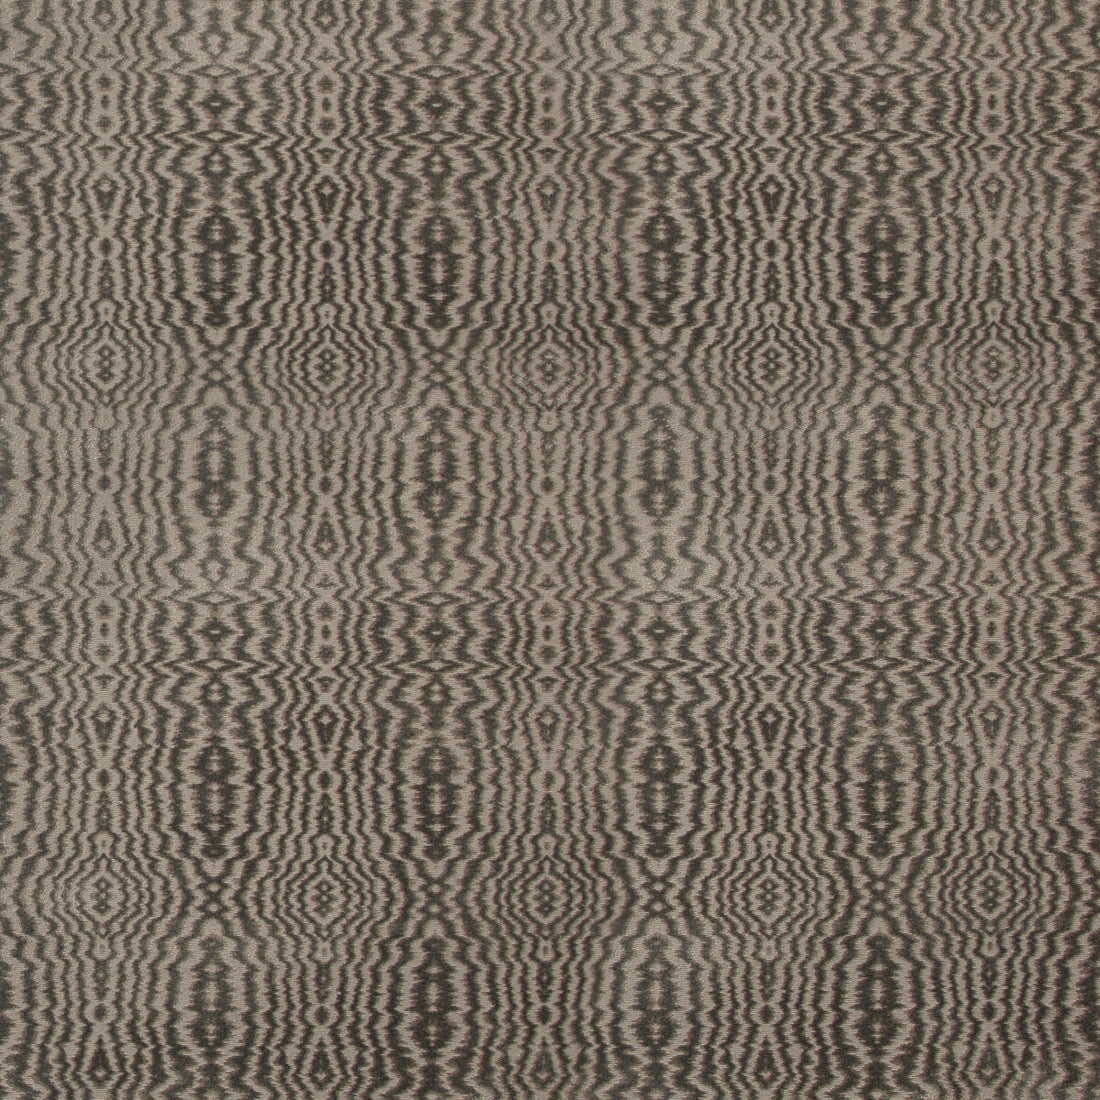 Callow Velvet fabric in silver color - pattern 2019119.11.0 - by Lee Jofa in the Harlington Velvets collection